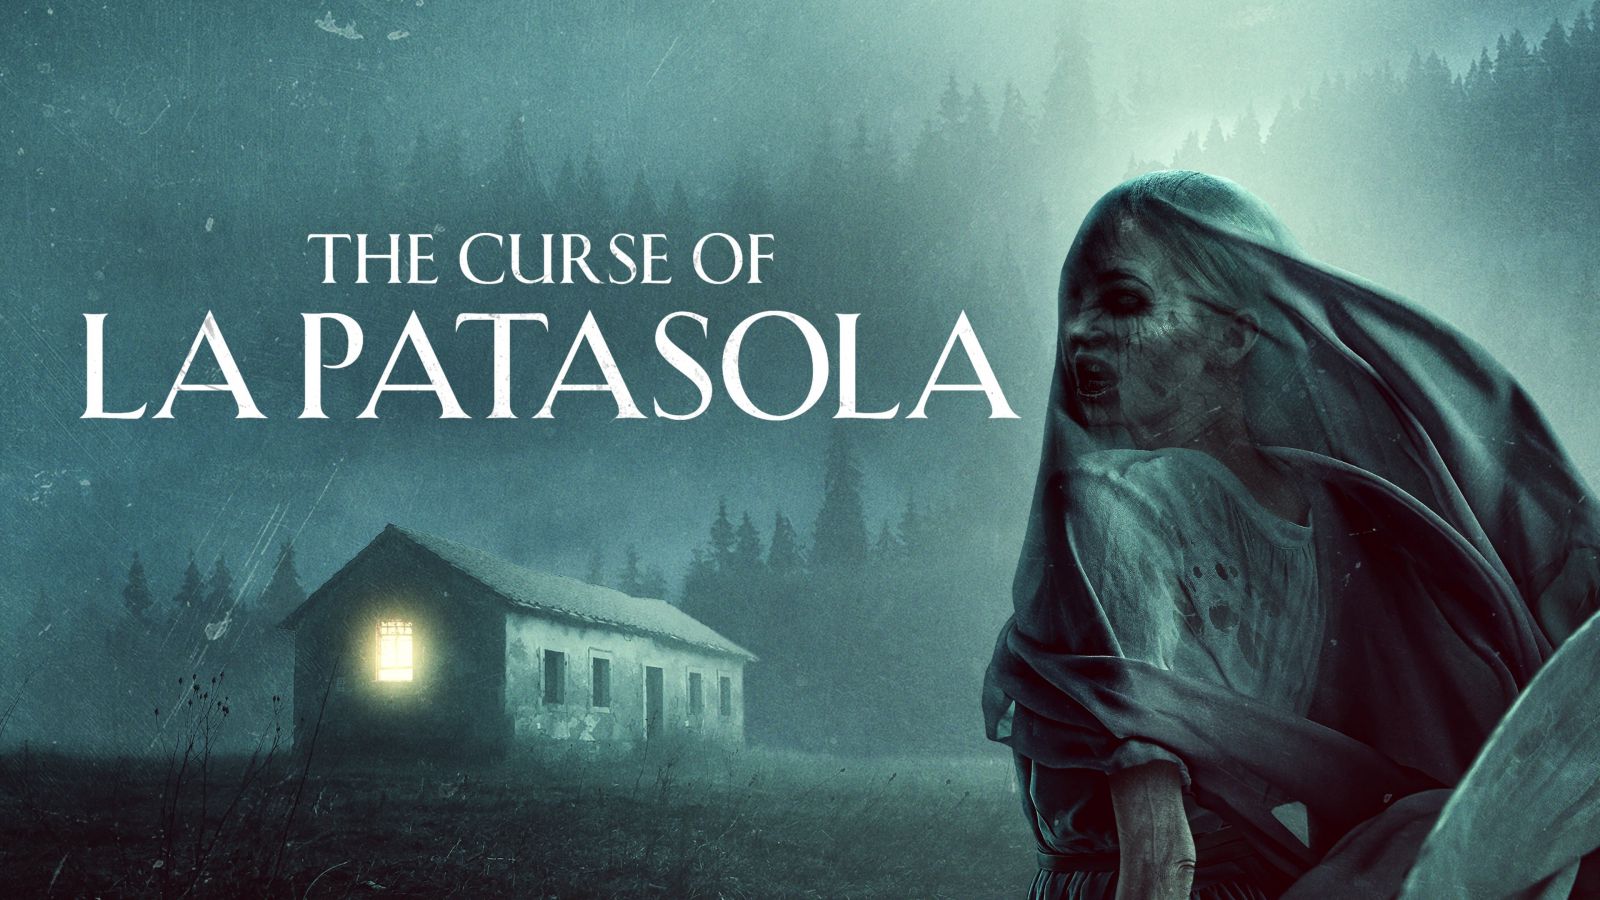 Watch The Curse of La Patasola (2022) Full Movies Free Online